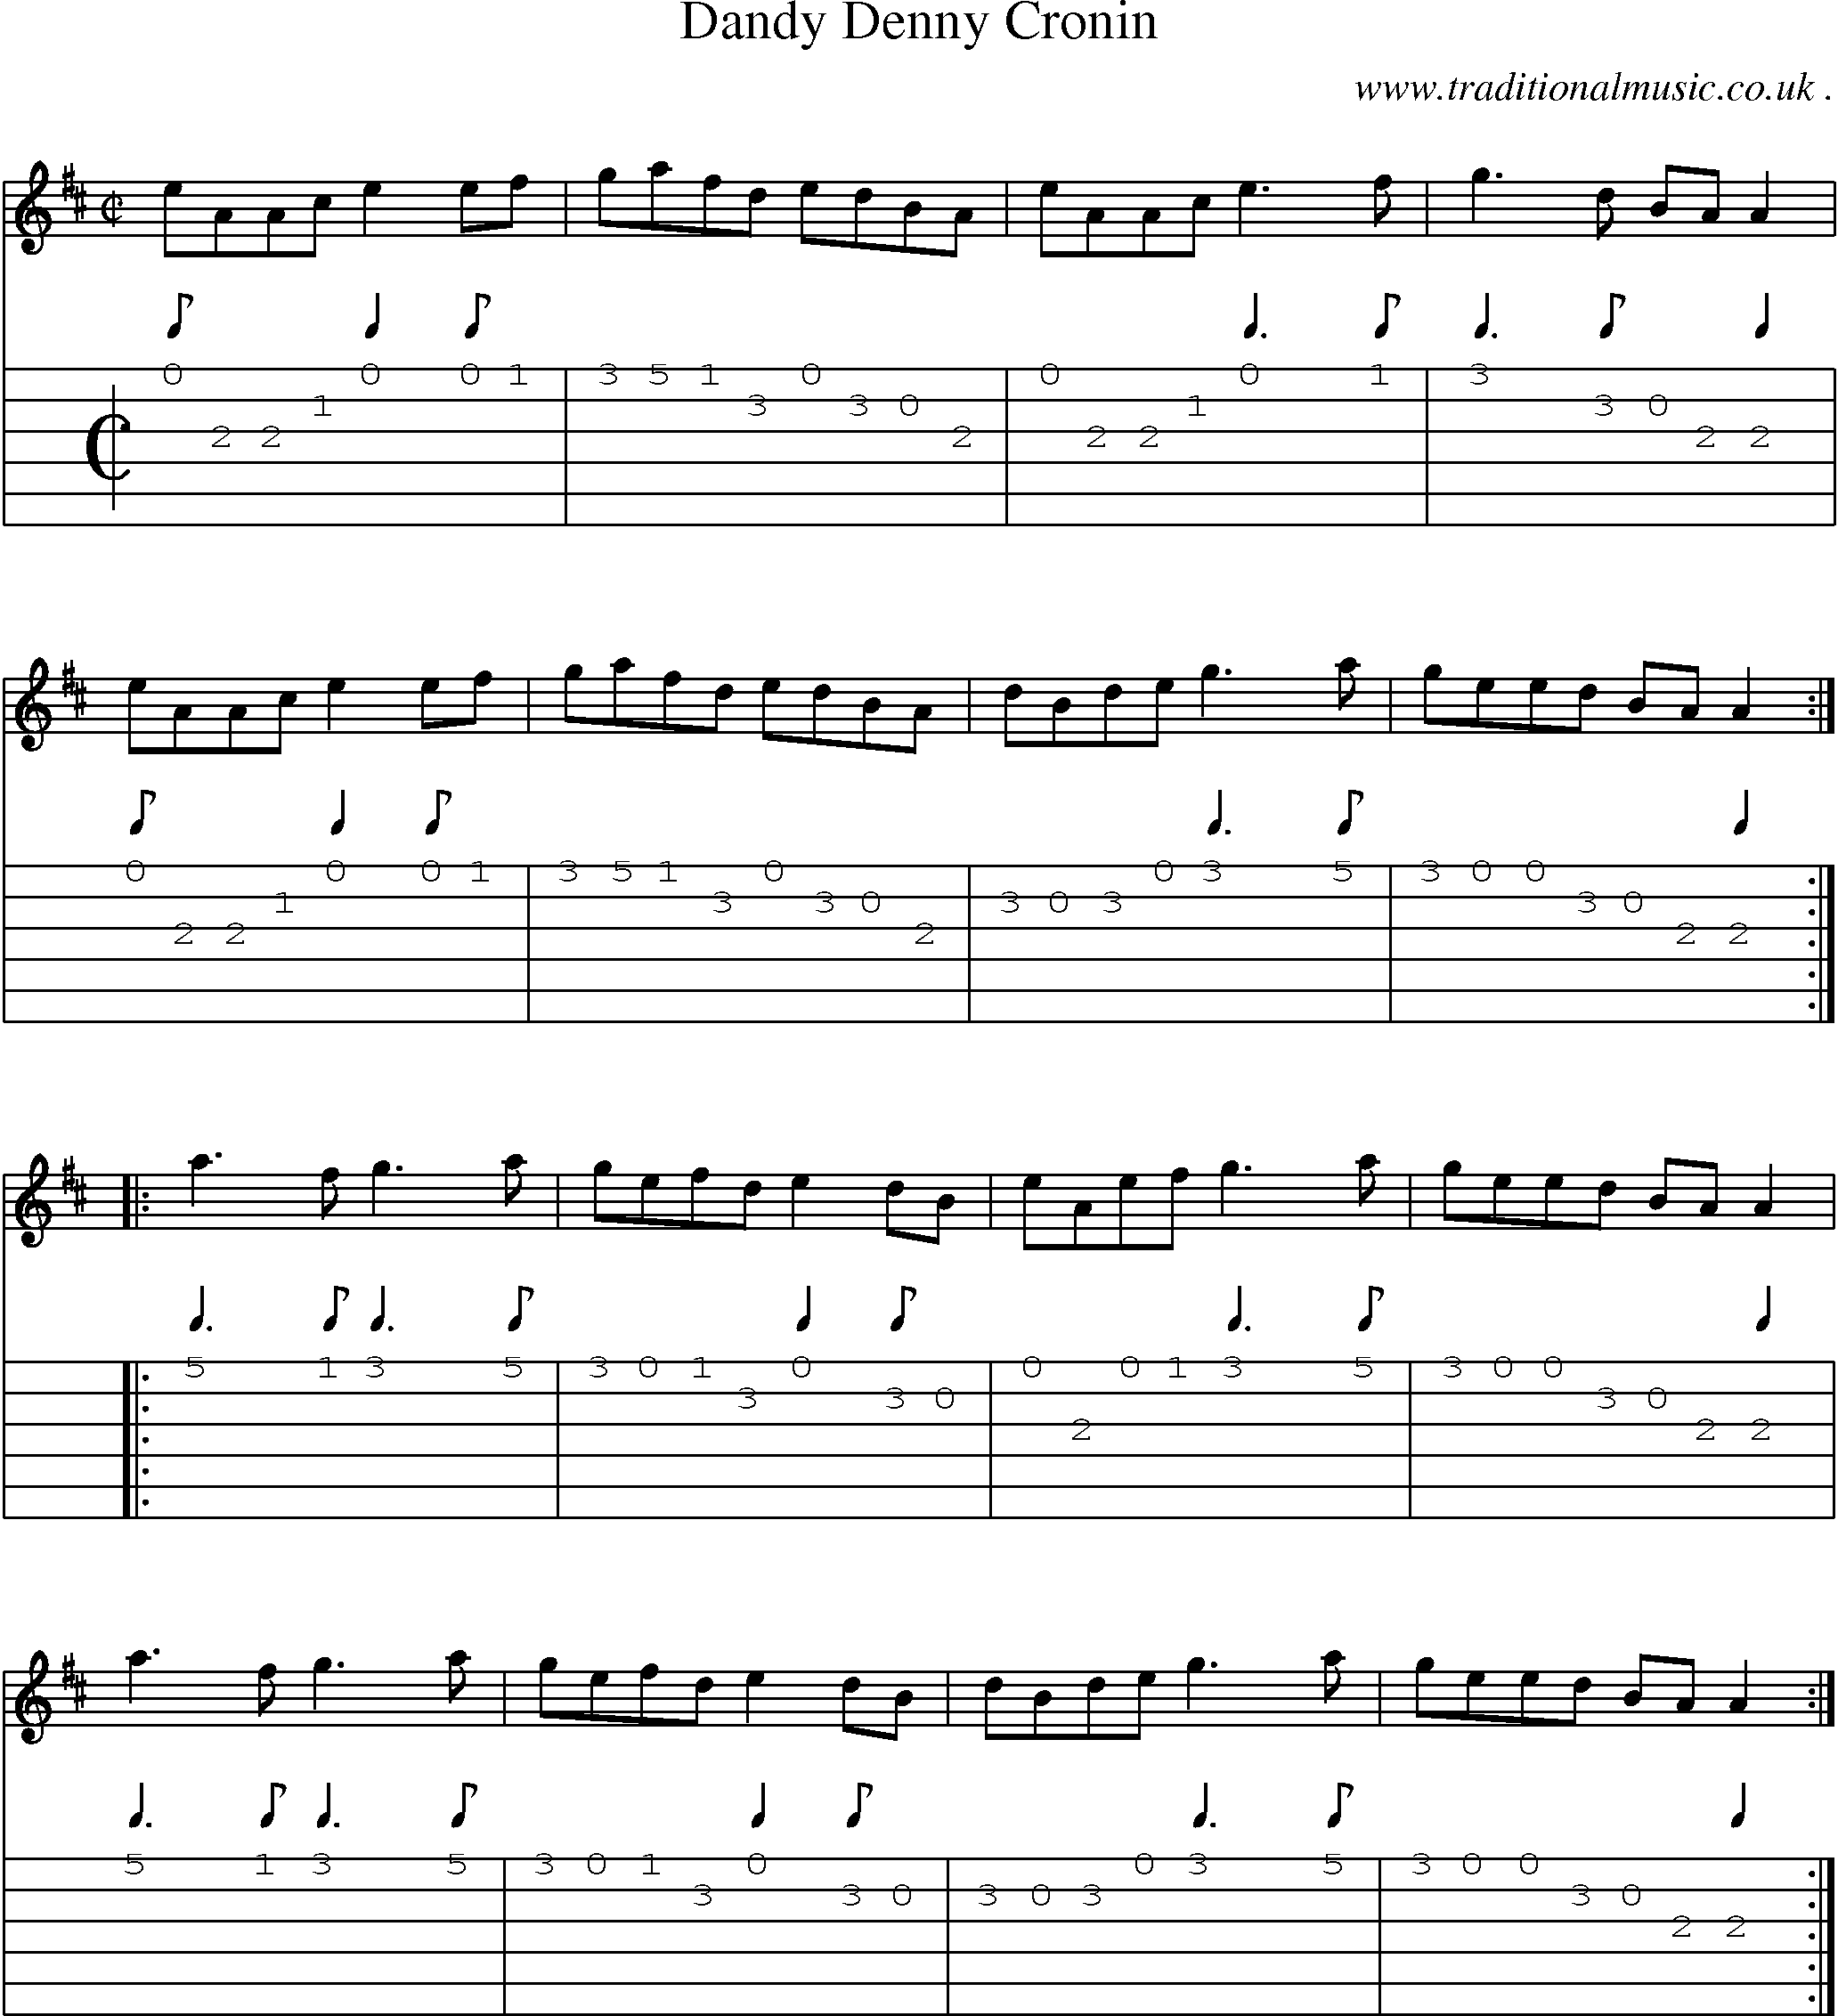 Sheet-Music and Guitar Tabs for Dandy Denny Cronin